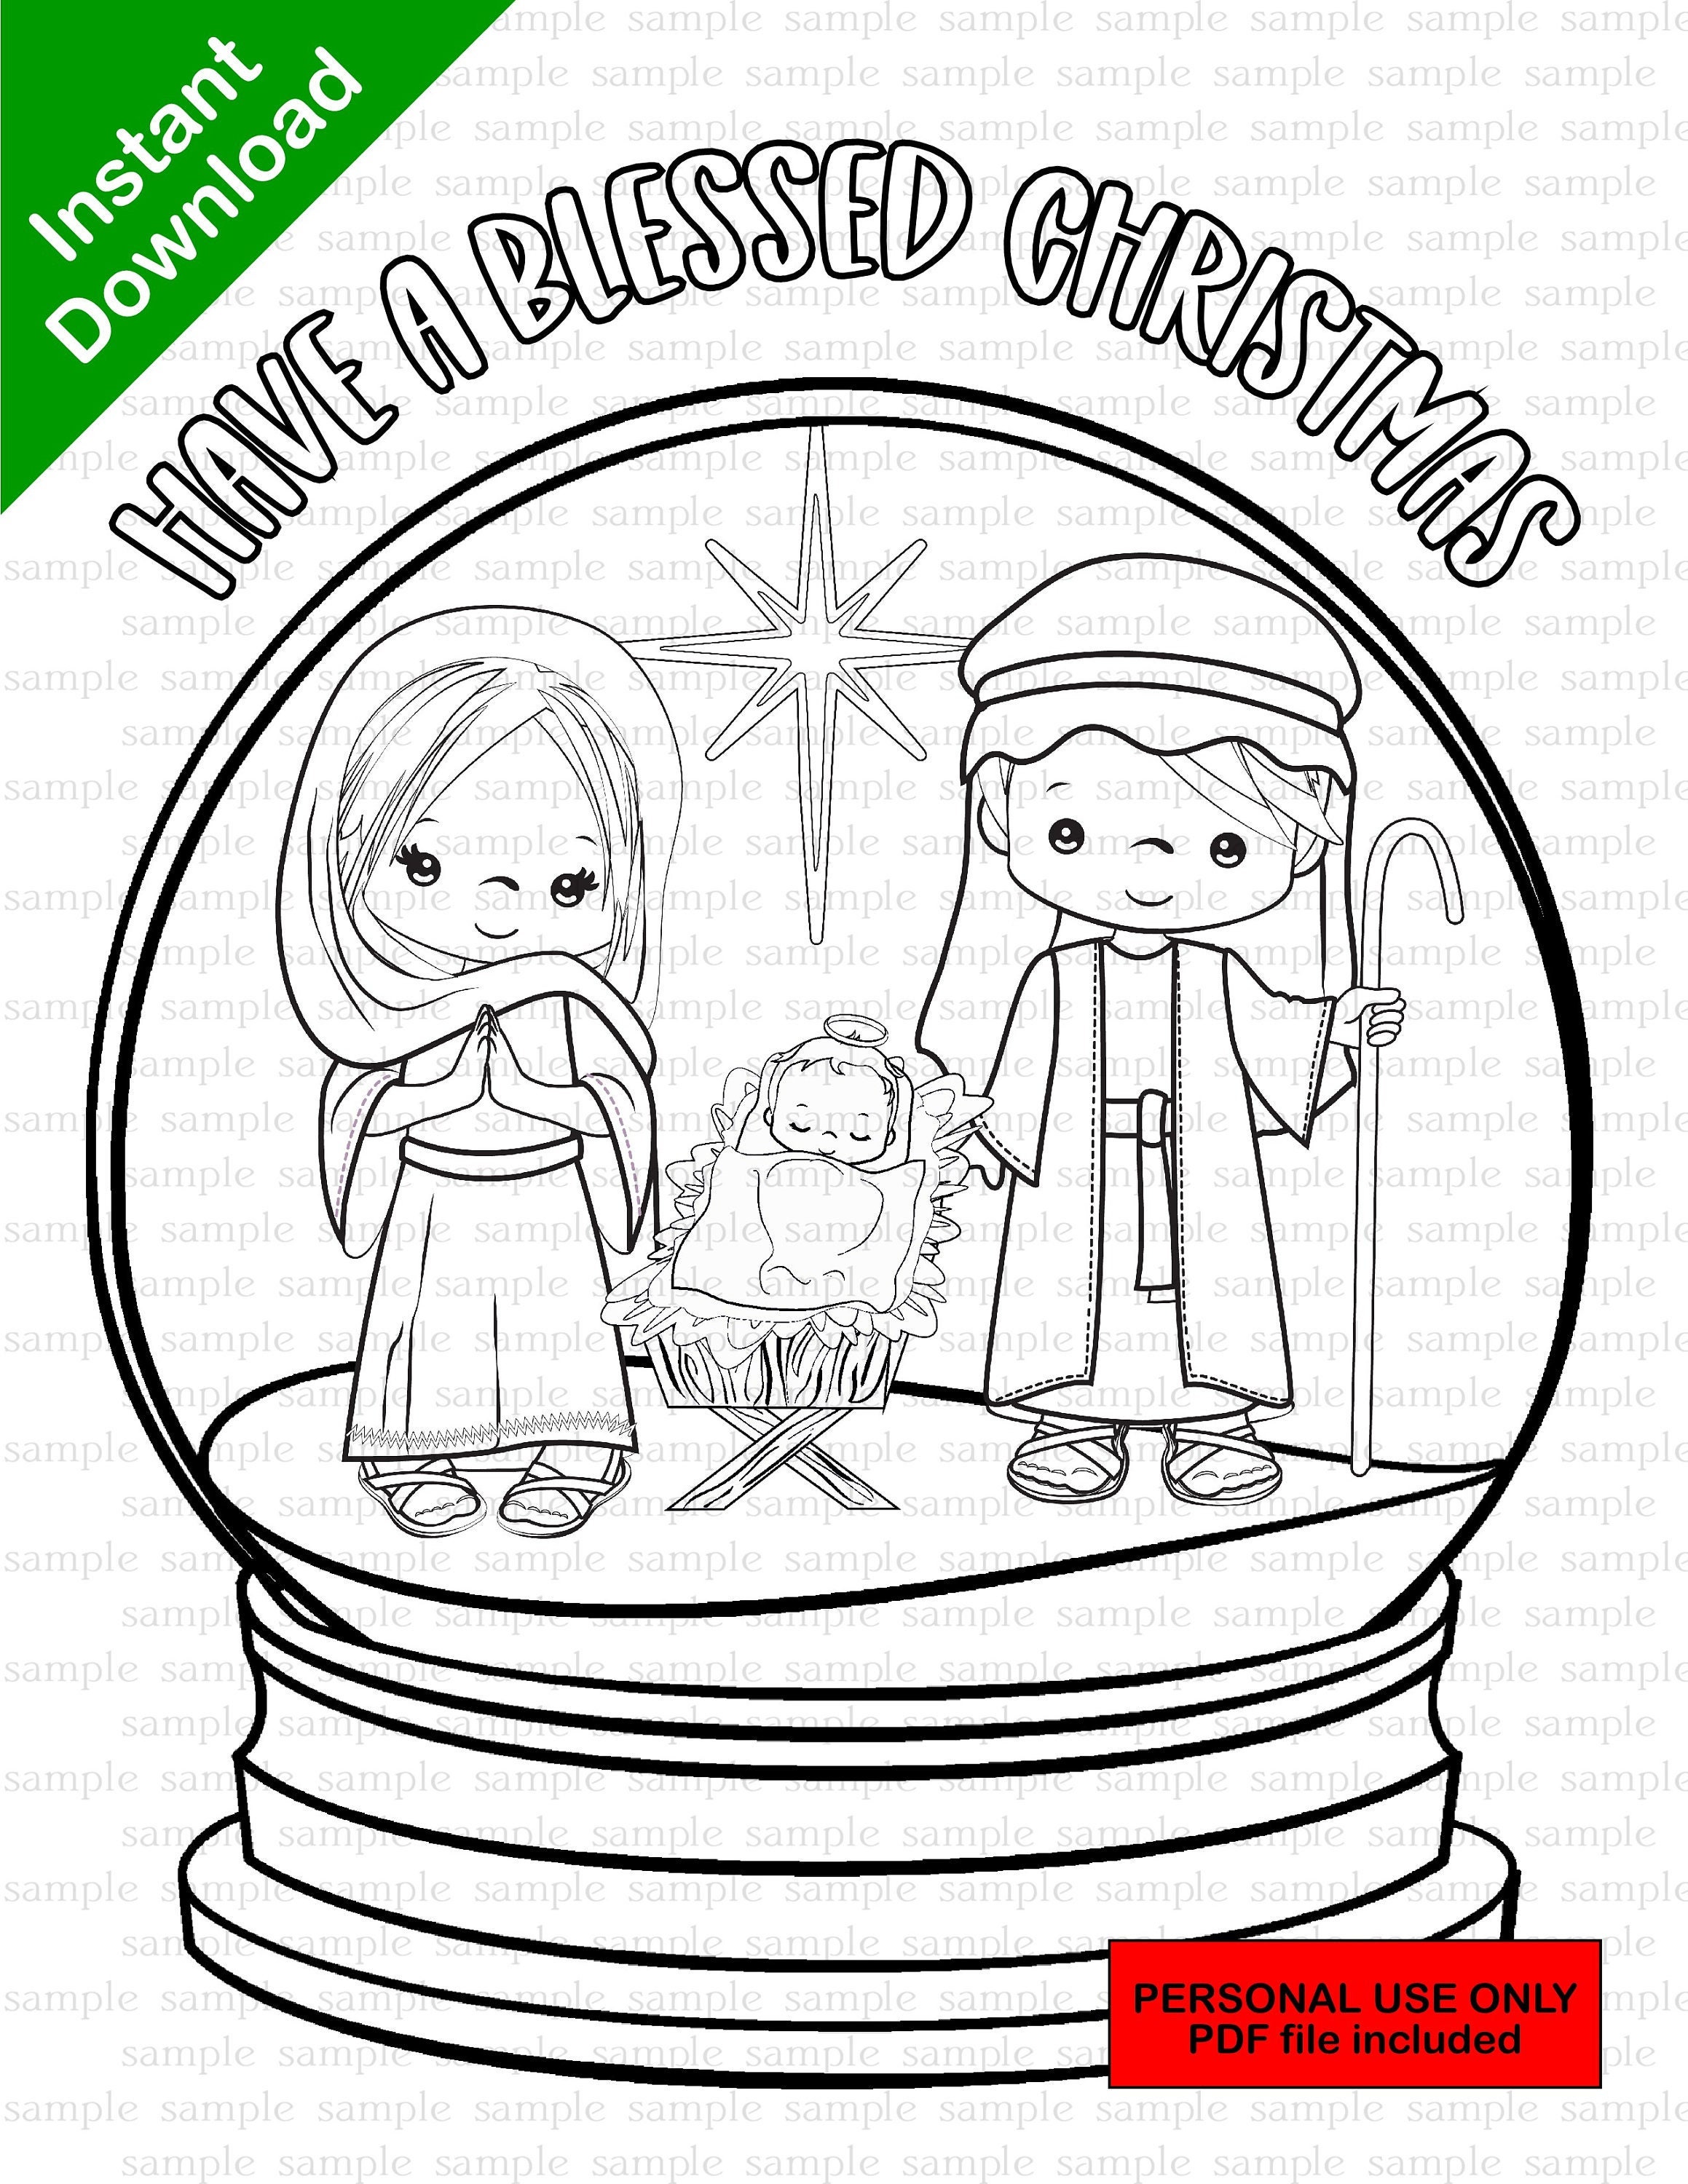 Nativity coloring page jesus birth colouring sheet saviour is born snow globe instant download pdf included